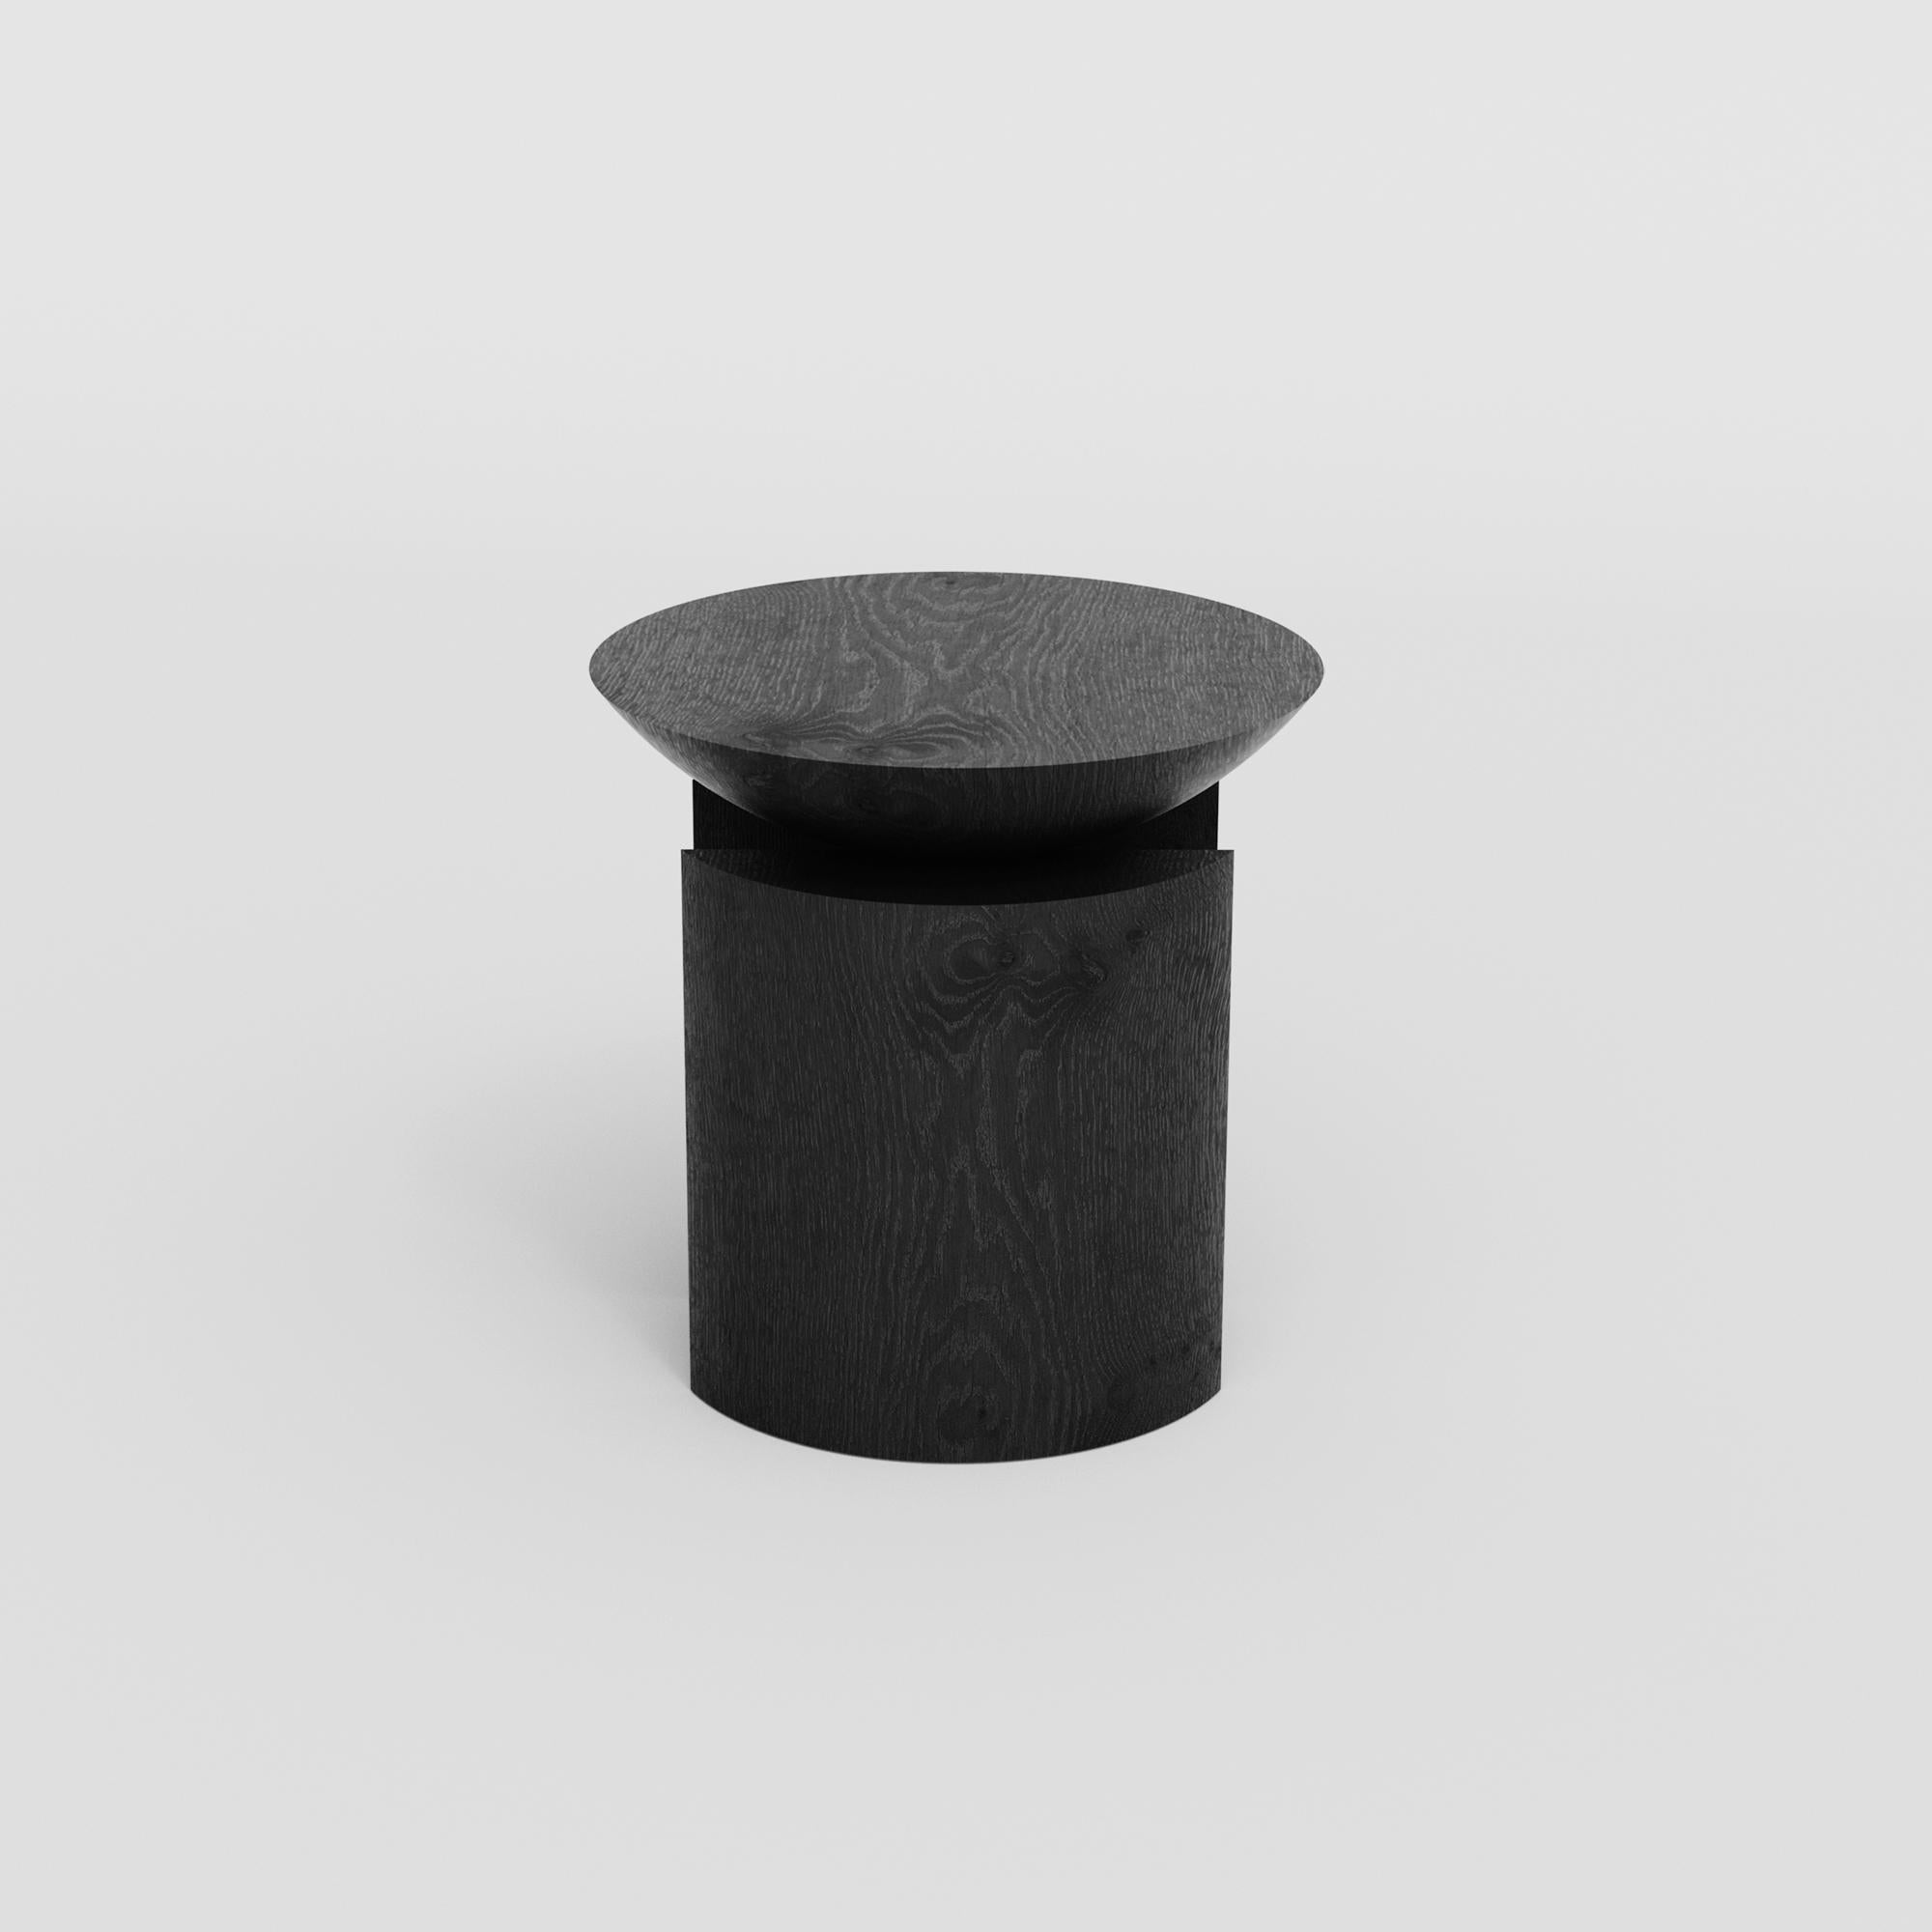 Minimalist Anca Alta Sculptural Side Table/Stool Tropical Hardwood by Pedro Paulo Venzon